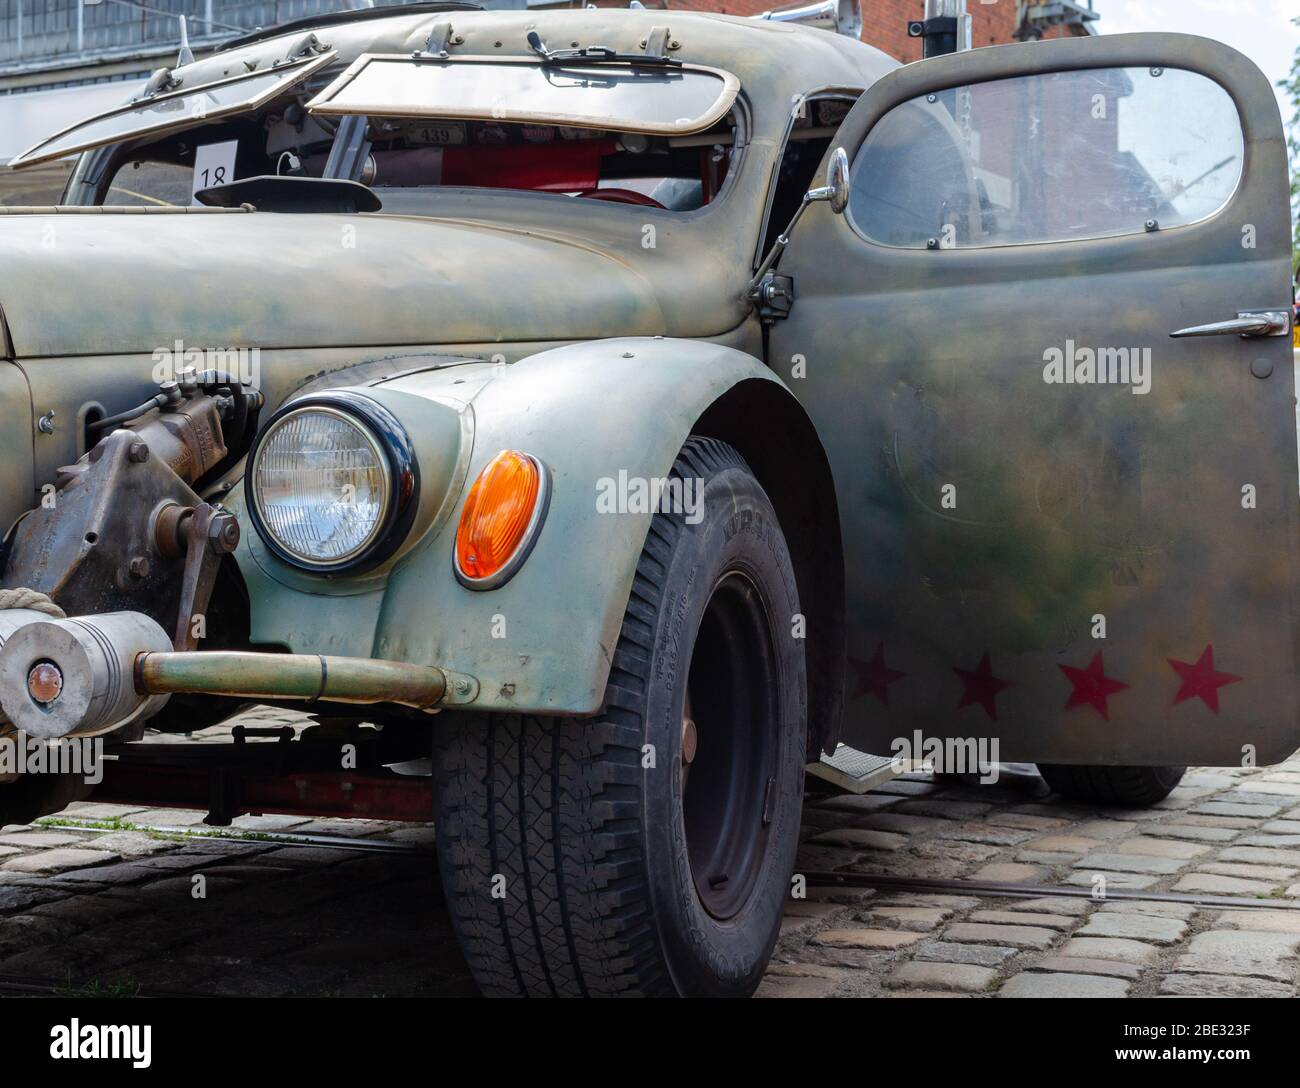 WROCLAW, POLAND - August 11, 2019: USA cars show: green american military car with rising windshields. Stock Photo